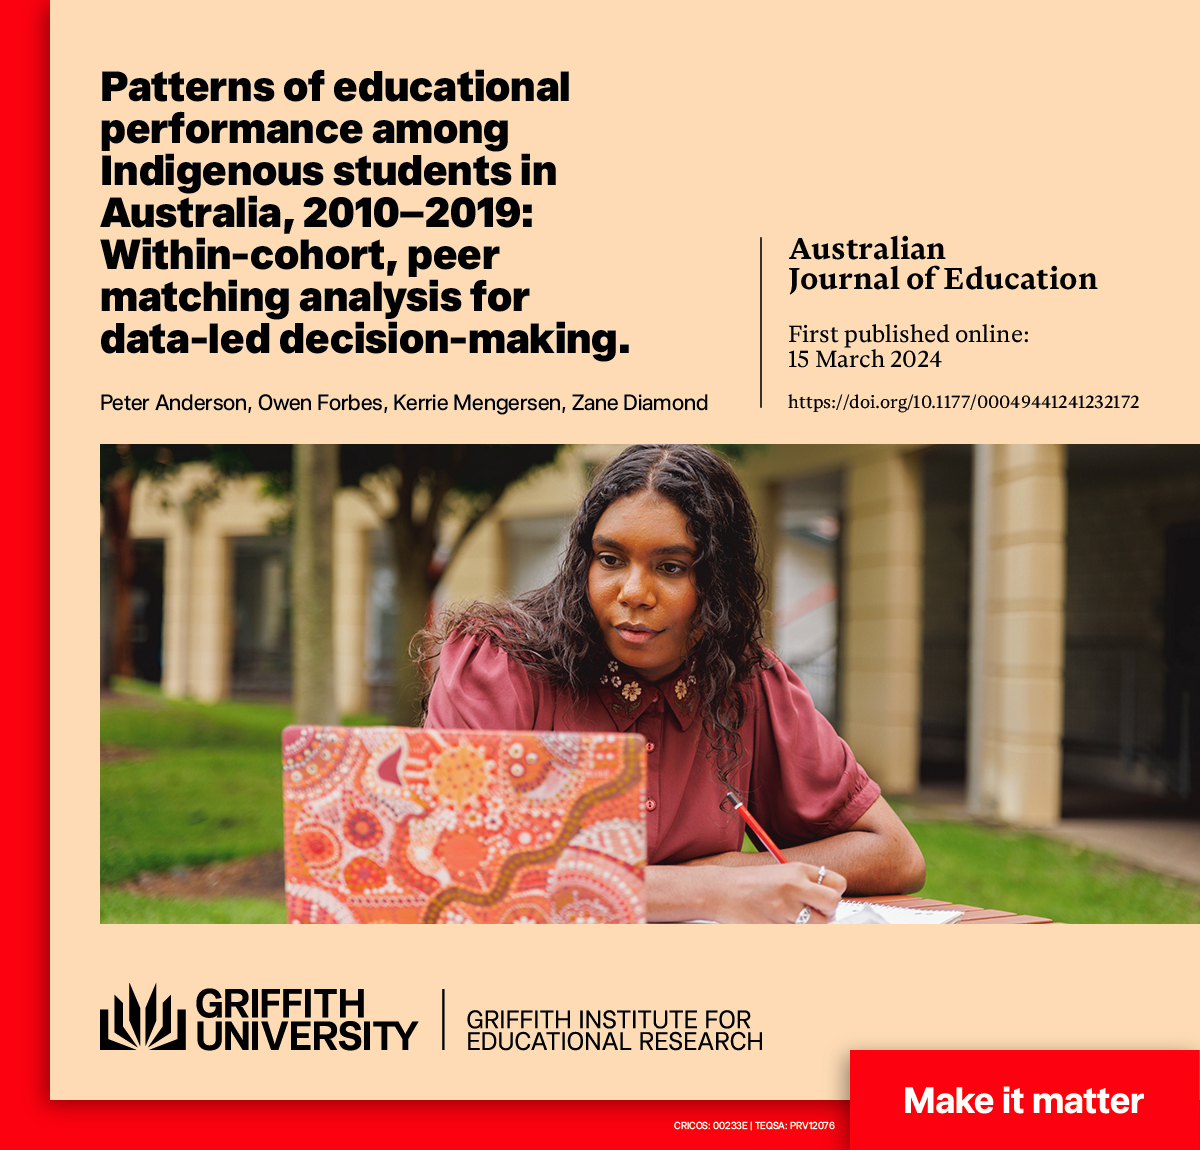 New Publication Alert 📢 @GIER_edu member Prof.Peter J. Anderson, PhD, SFHEA, MAIATSIS, FQA and colleagues have just published an important article Patterns of Educational Performance among Indigenous Students in Australia, 2010–2019: Within-cohort, peer matching analysis for